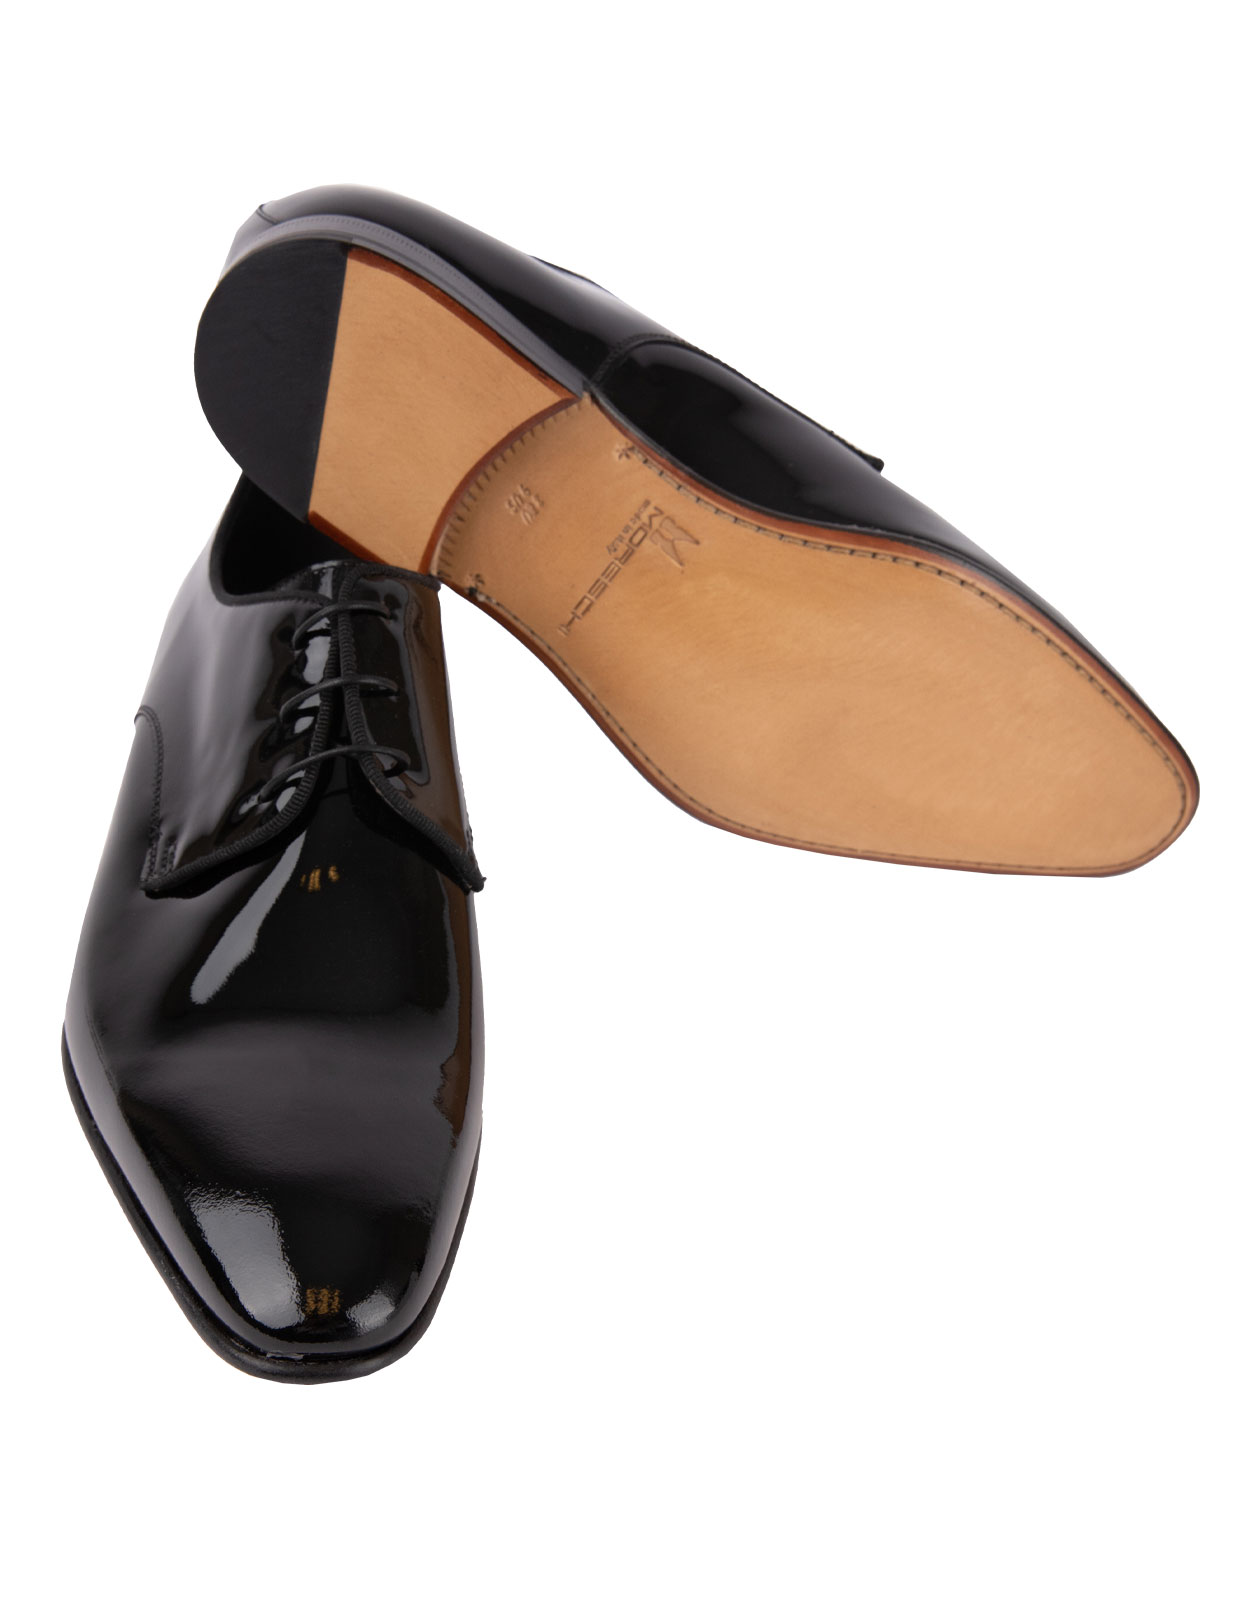 Lille Patent Leather Derby Shoes Black Stl 9